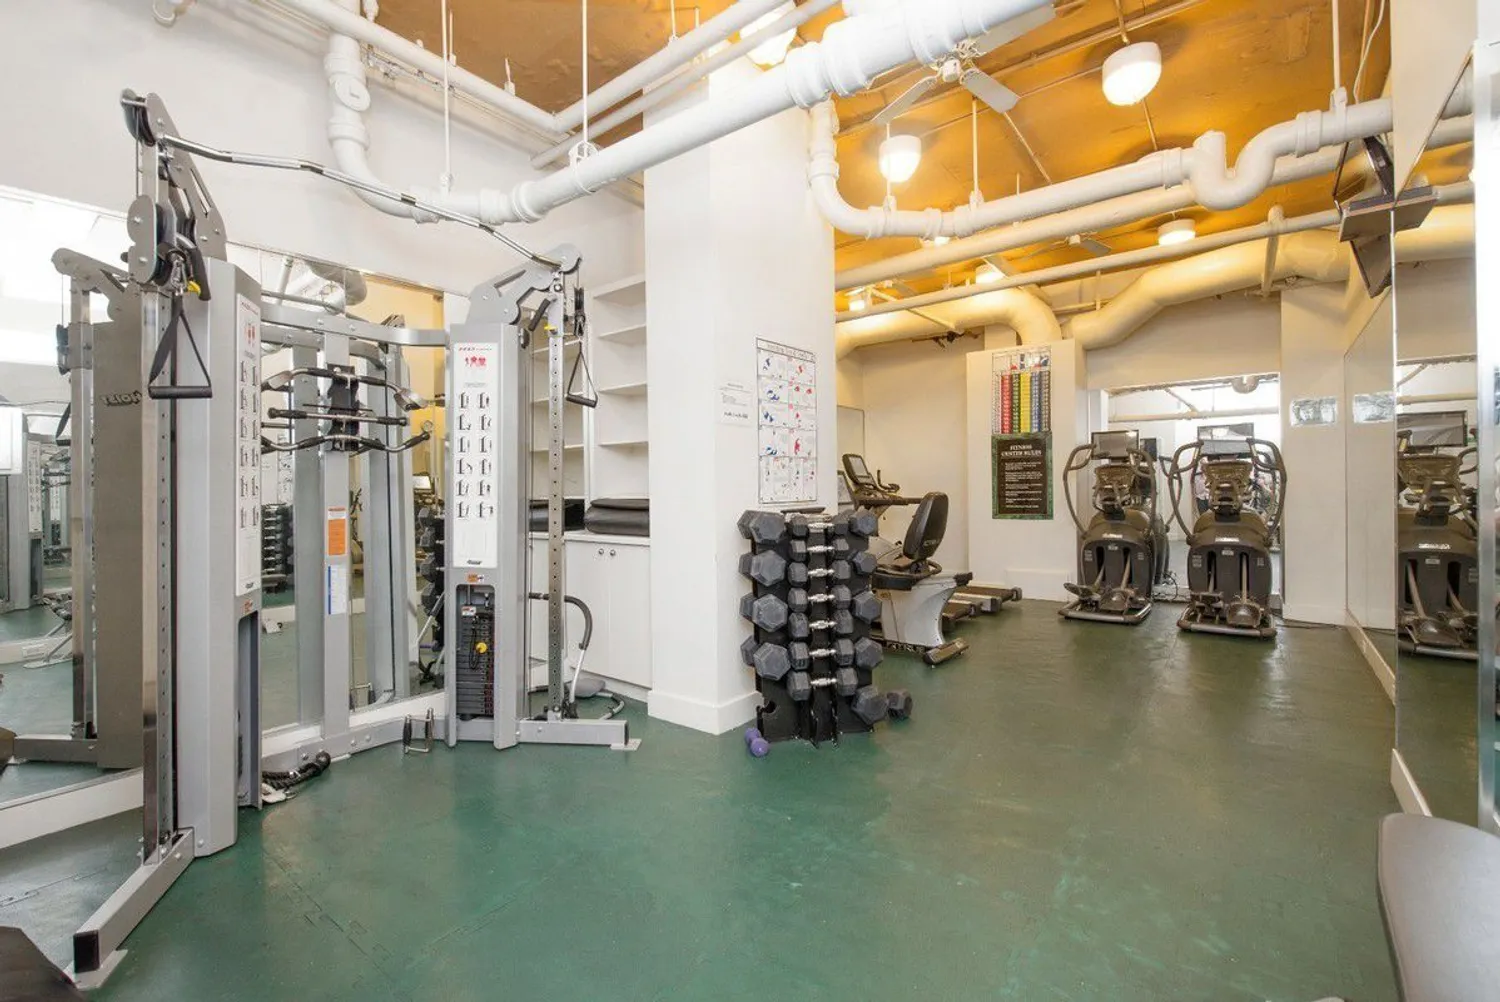 Fitness center always open & costs $300 per year.